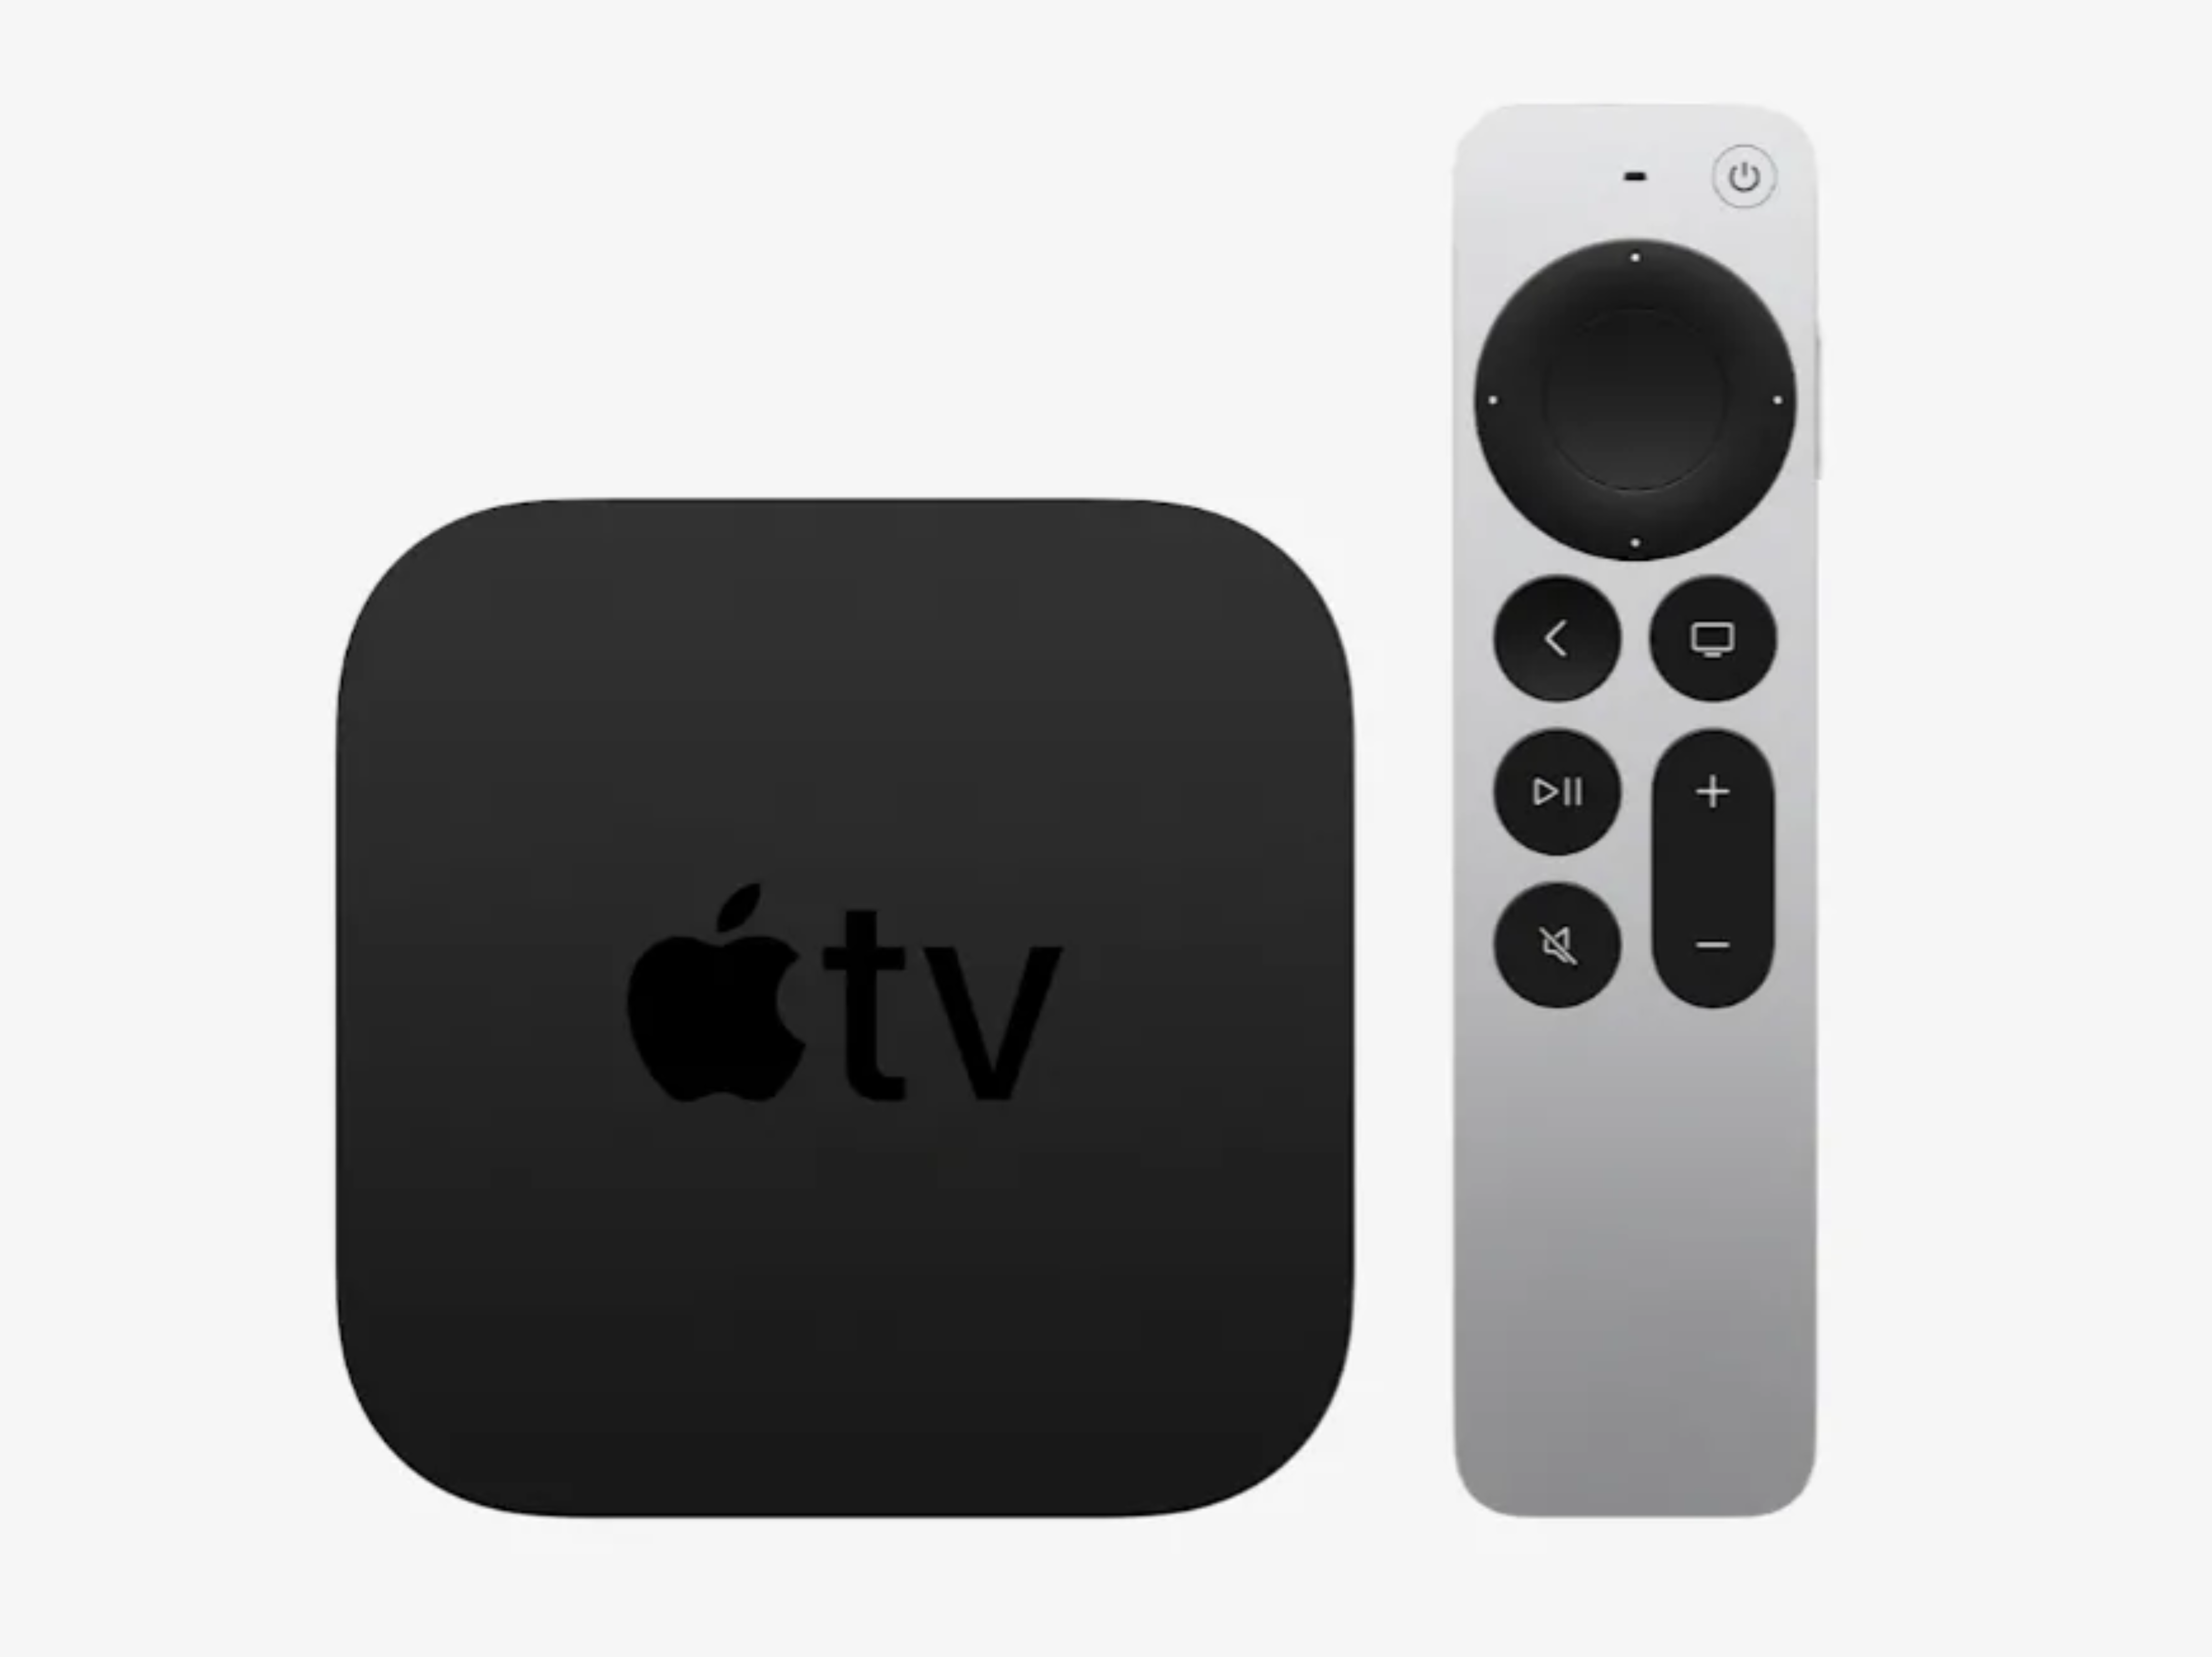 Apple unveils new Apple TV 4K with A12 Bionic and new Siri Remote